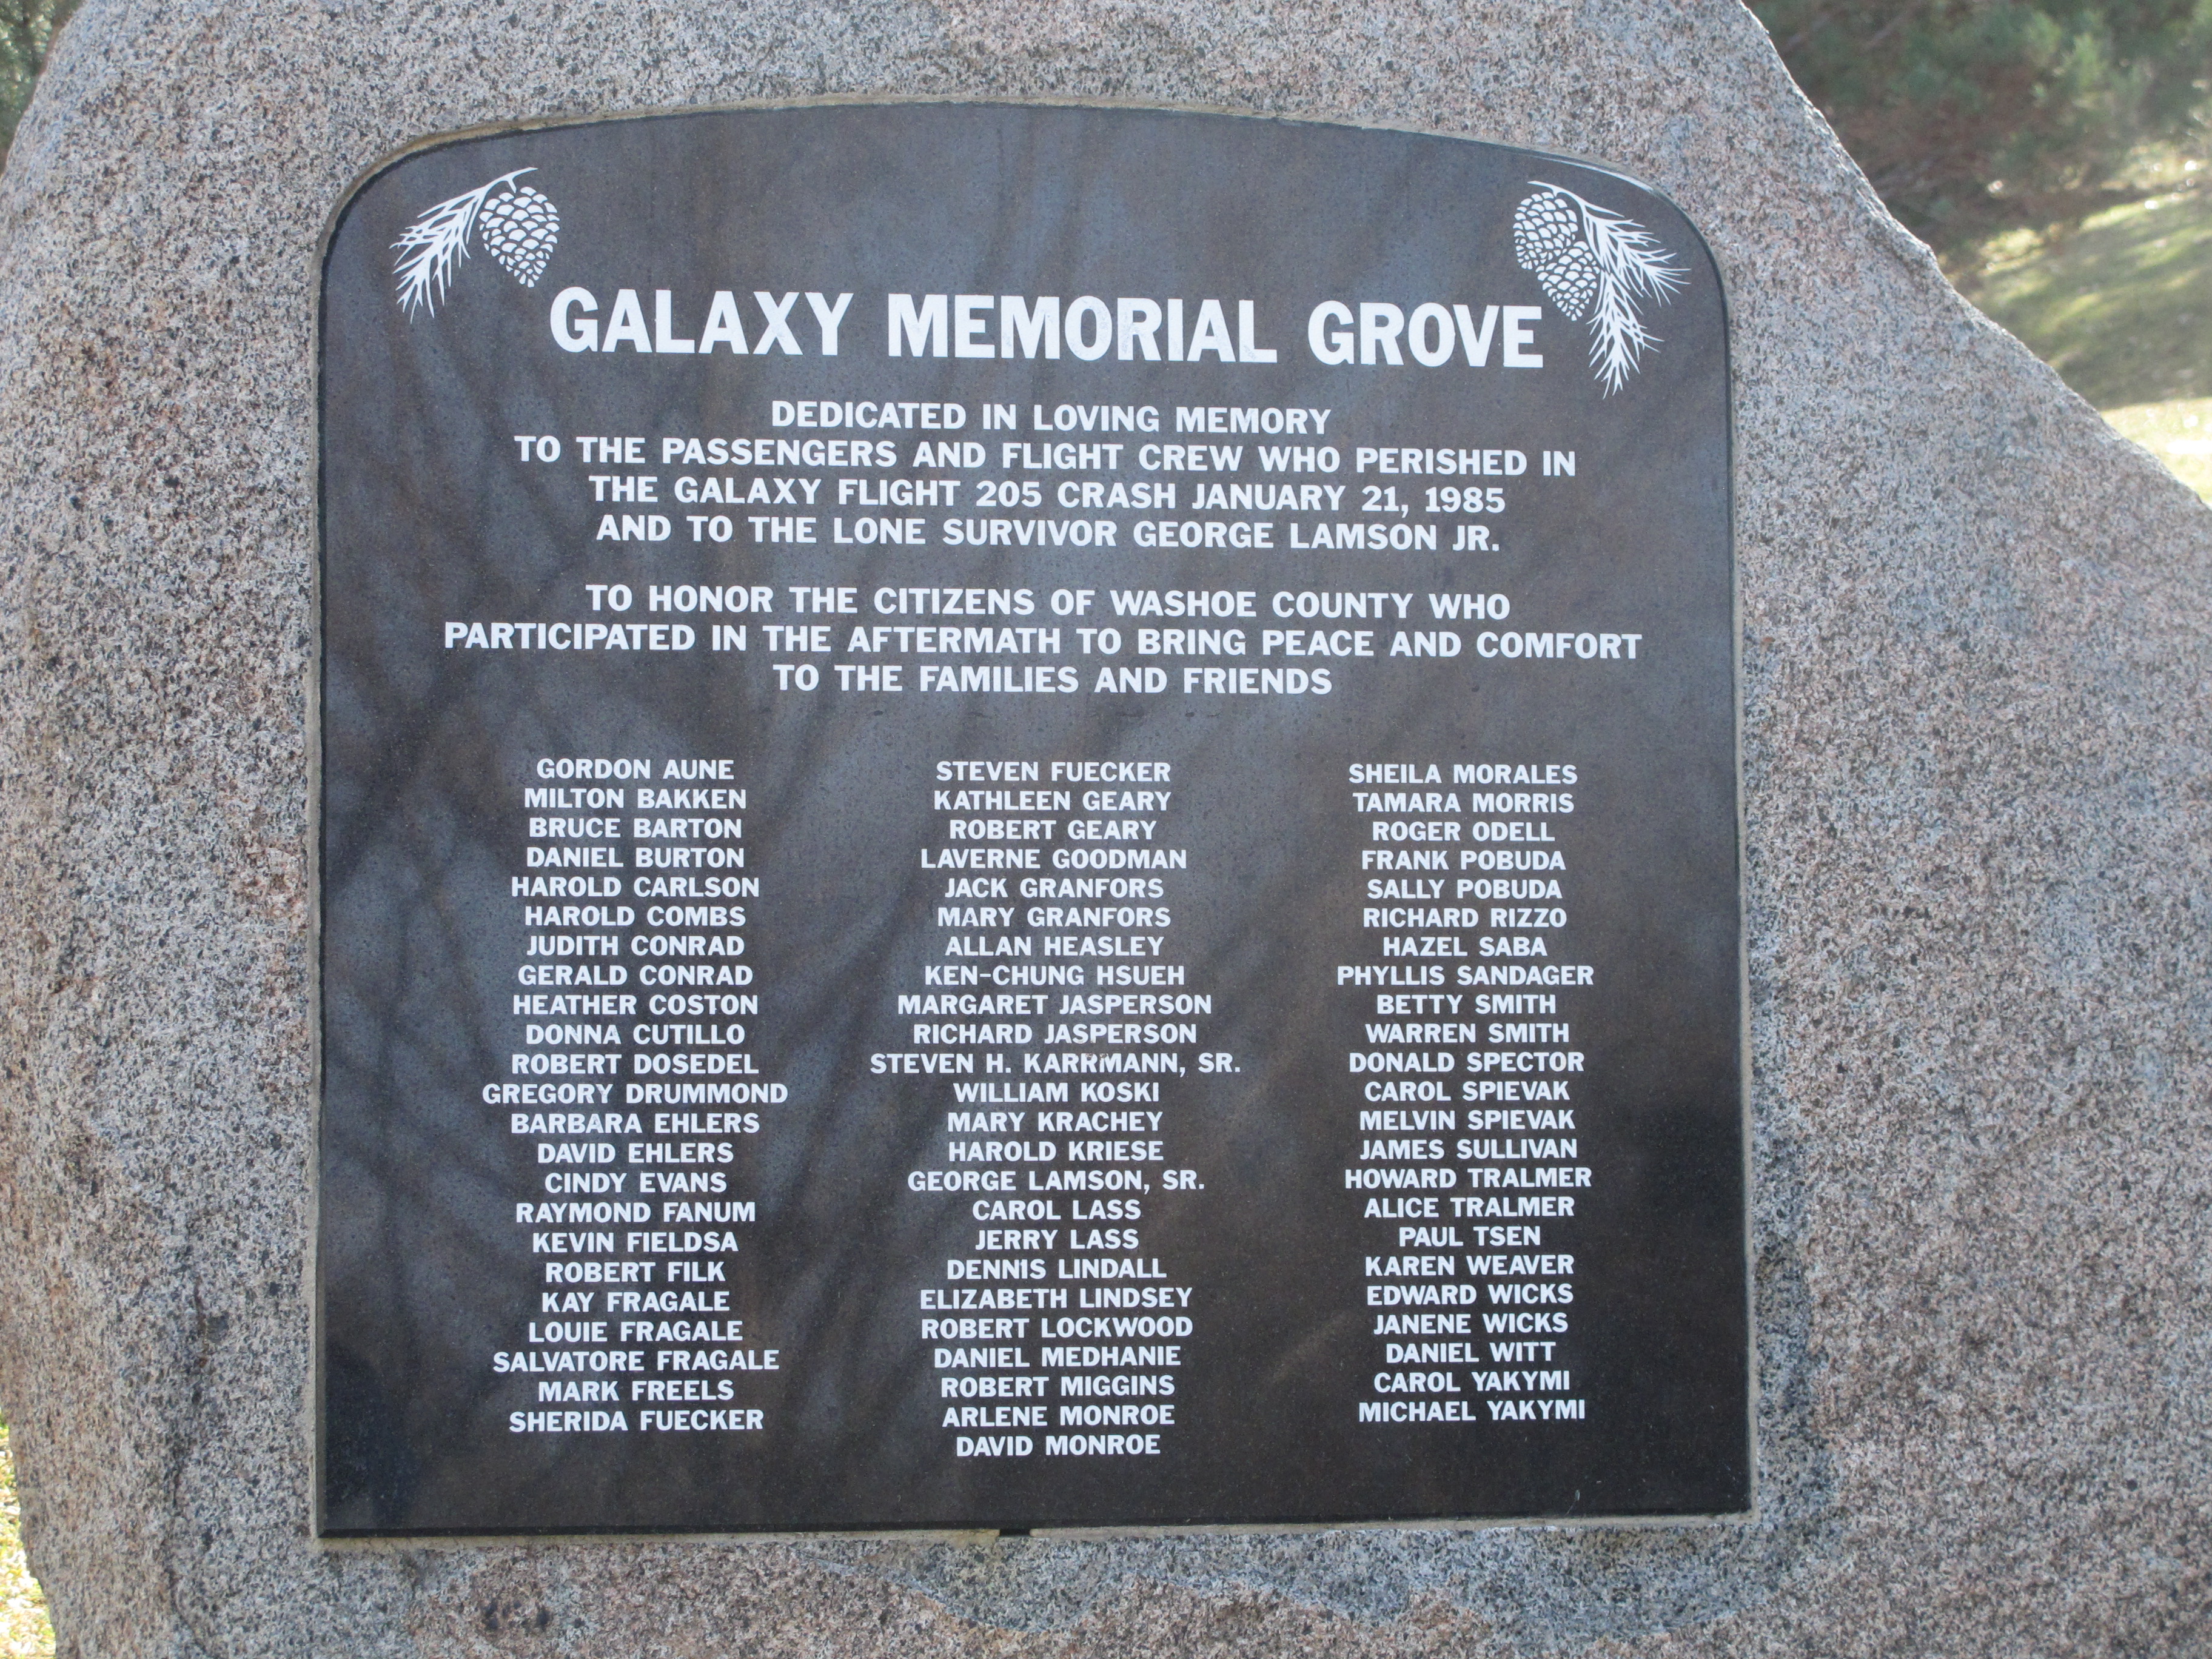 Washoe County officials have erected a new plaque in the memory of the 70 victims and lone survivor of the 1985 Galaxy Airlines Flight 203 crash in Reno, Nev., on Tuesday, Jan. 20, 2015, the day before a rededication ceremony on the 30th anniversary of the tragedy. An earlier plaque was stolen two years ago near the campus of the University of Nevada, Reno. (AP Photo/Scott Sonner)